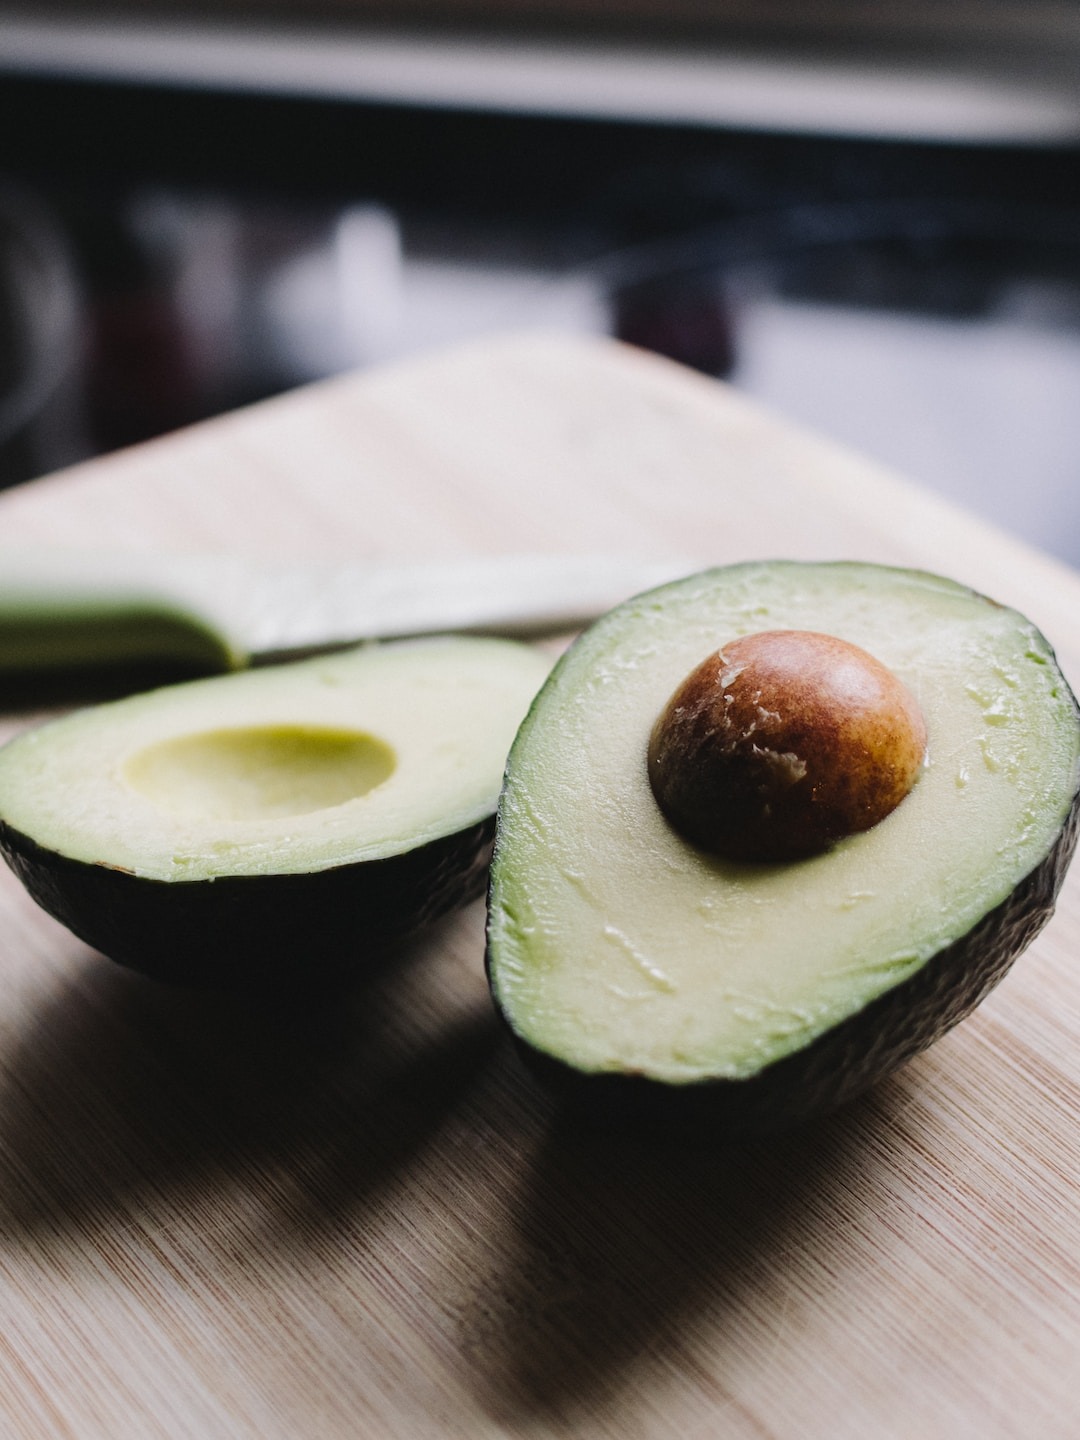 What Makes Avocados Healthy?